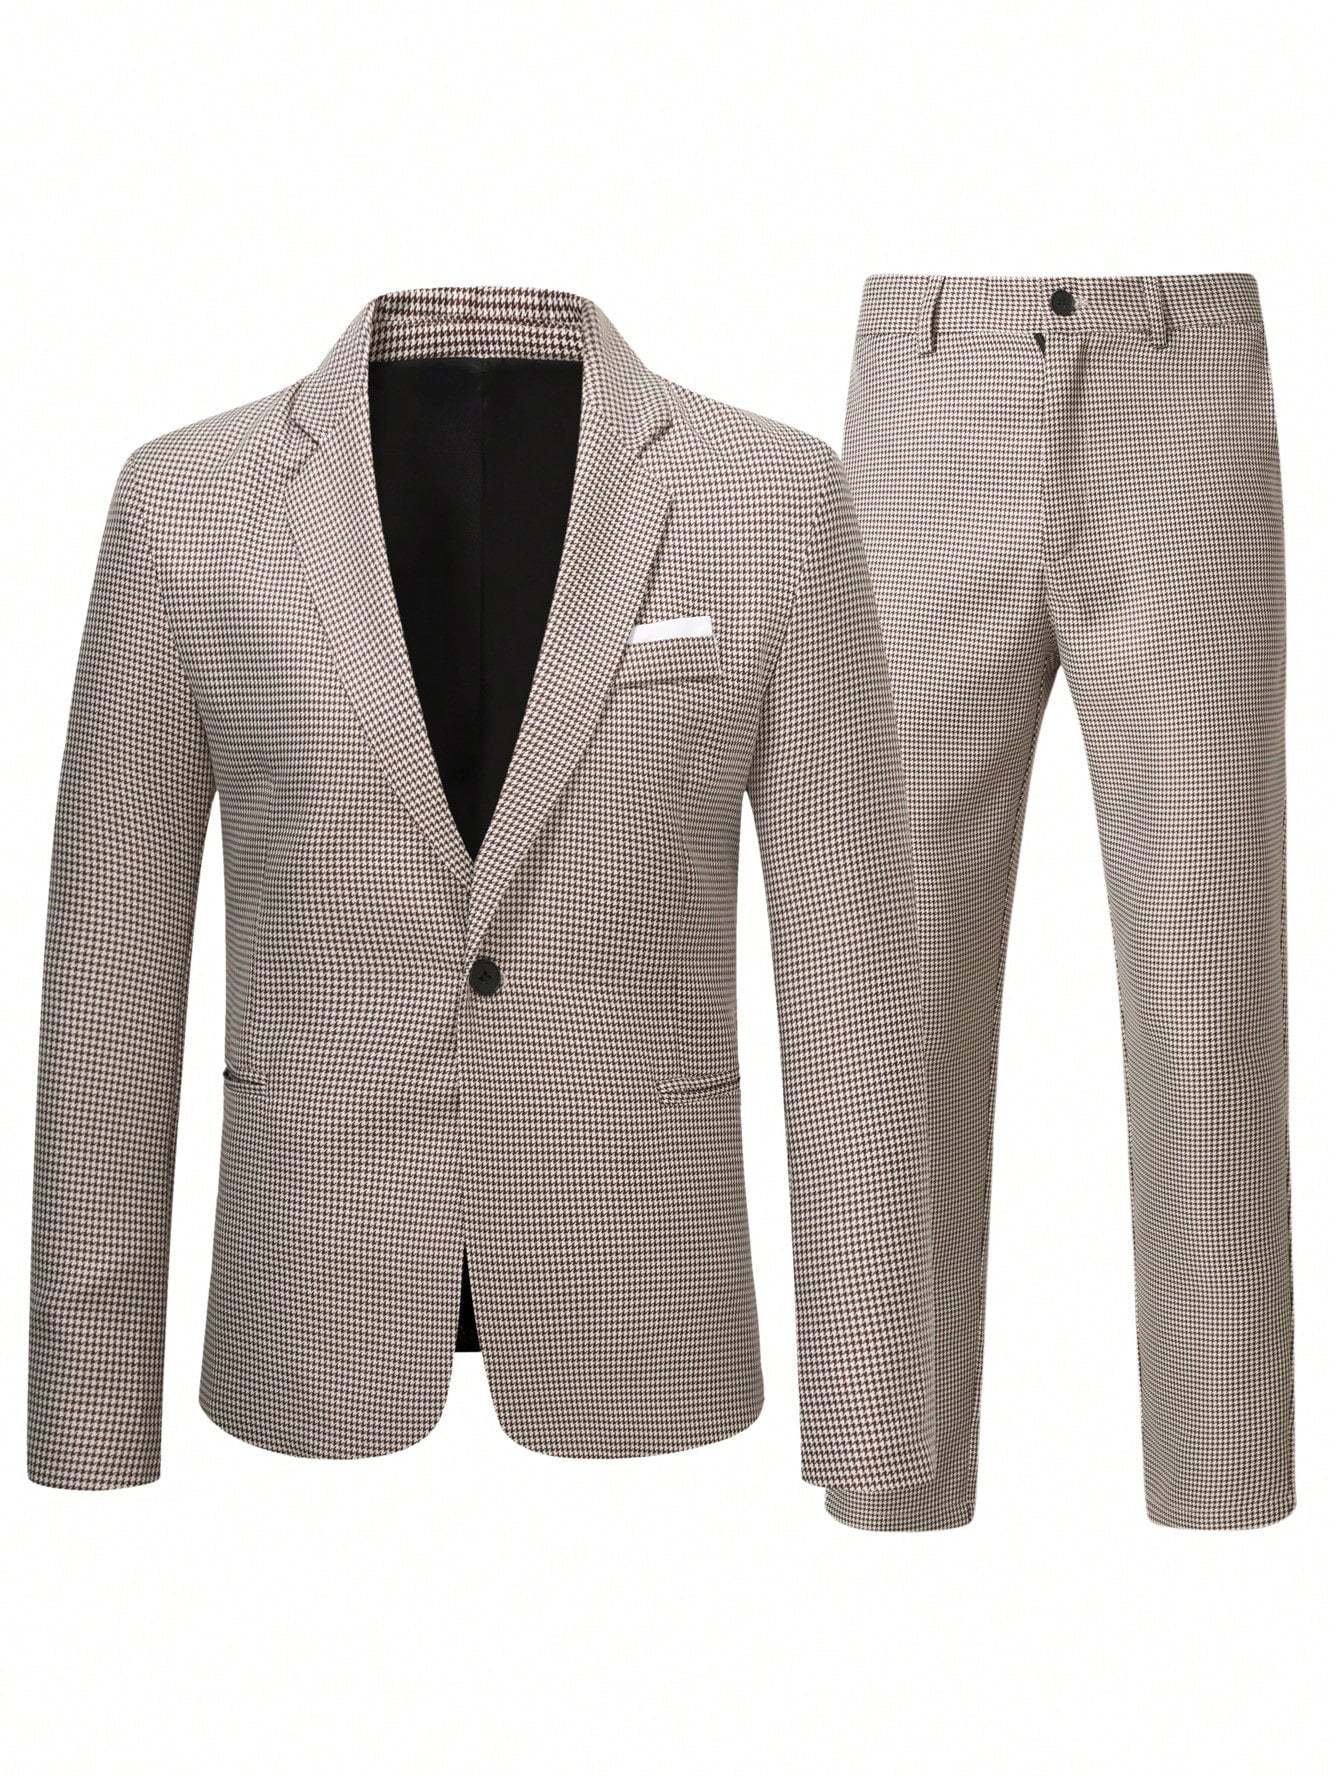 Manfinity Mode Men's Single-breasted Suit Jacket With Lapel Collar And Suit Pants